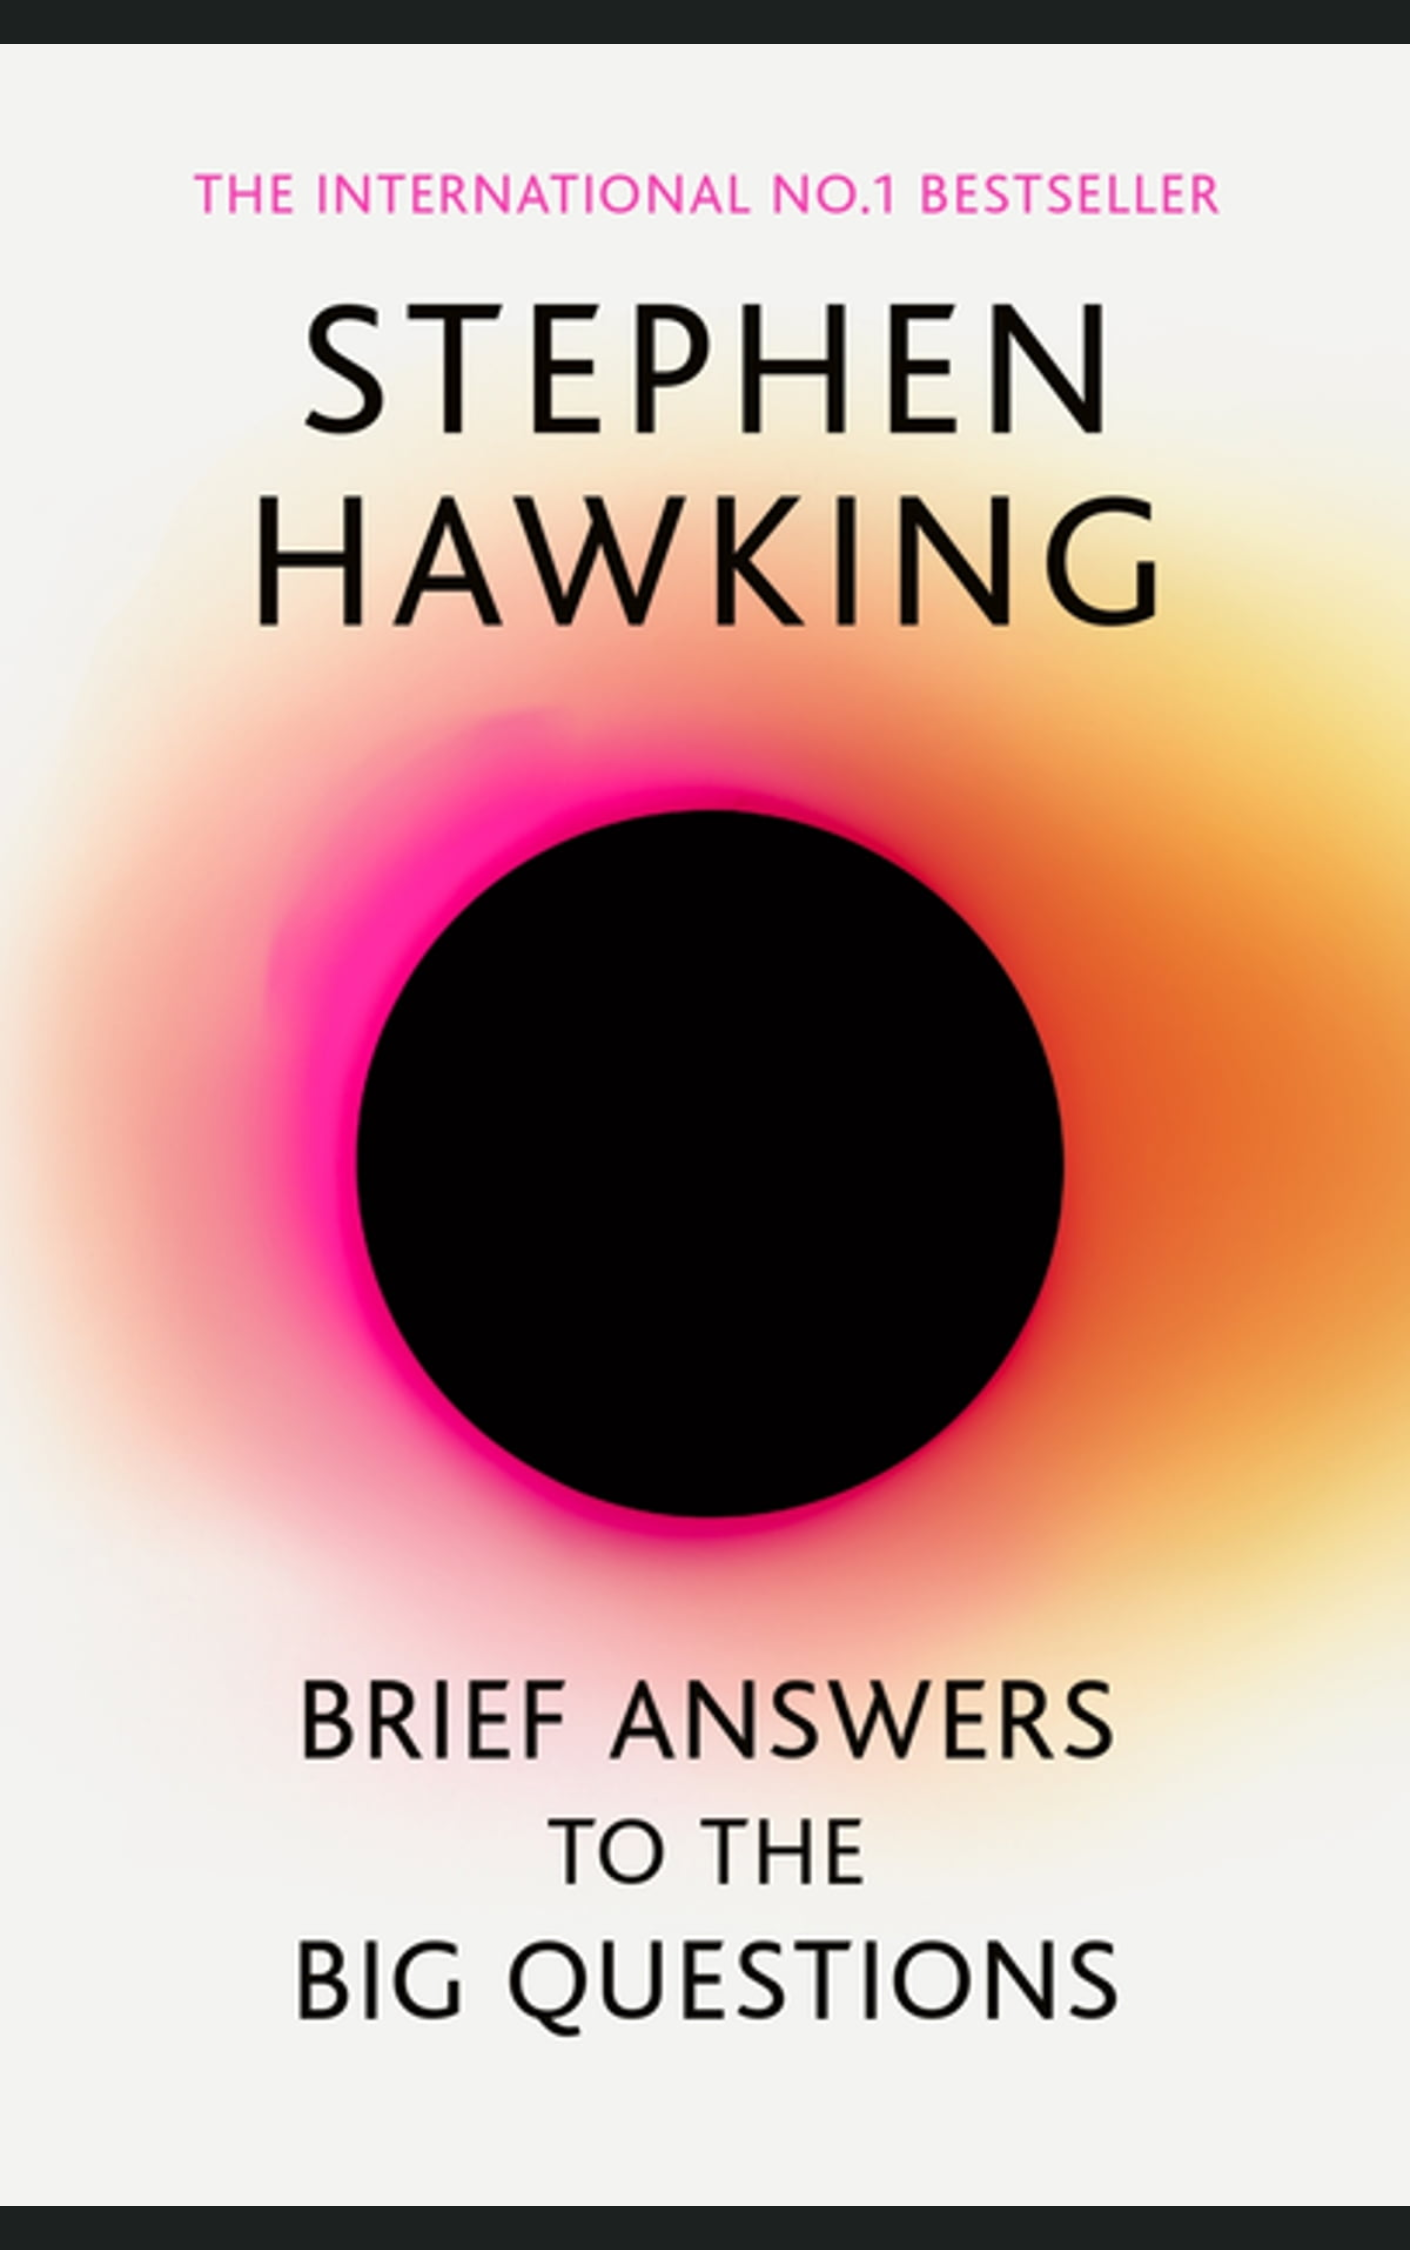 BRIEF ANSWERS TO THE BIG QUESTIONS By STEPHEN HAWKING